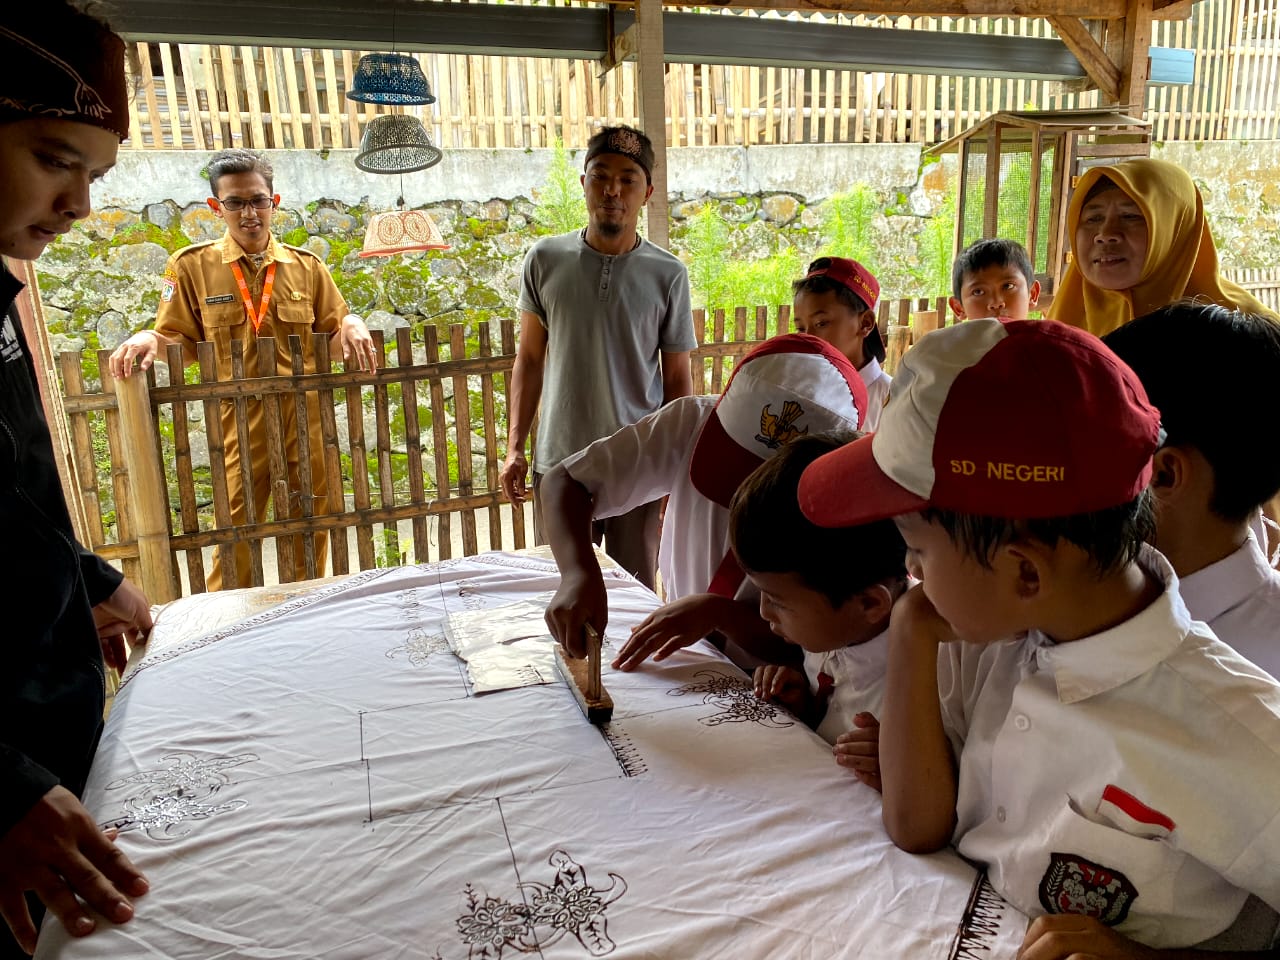 Psychology students from UMM are currently inventing batik together with elementary school students